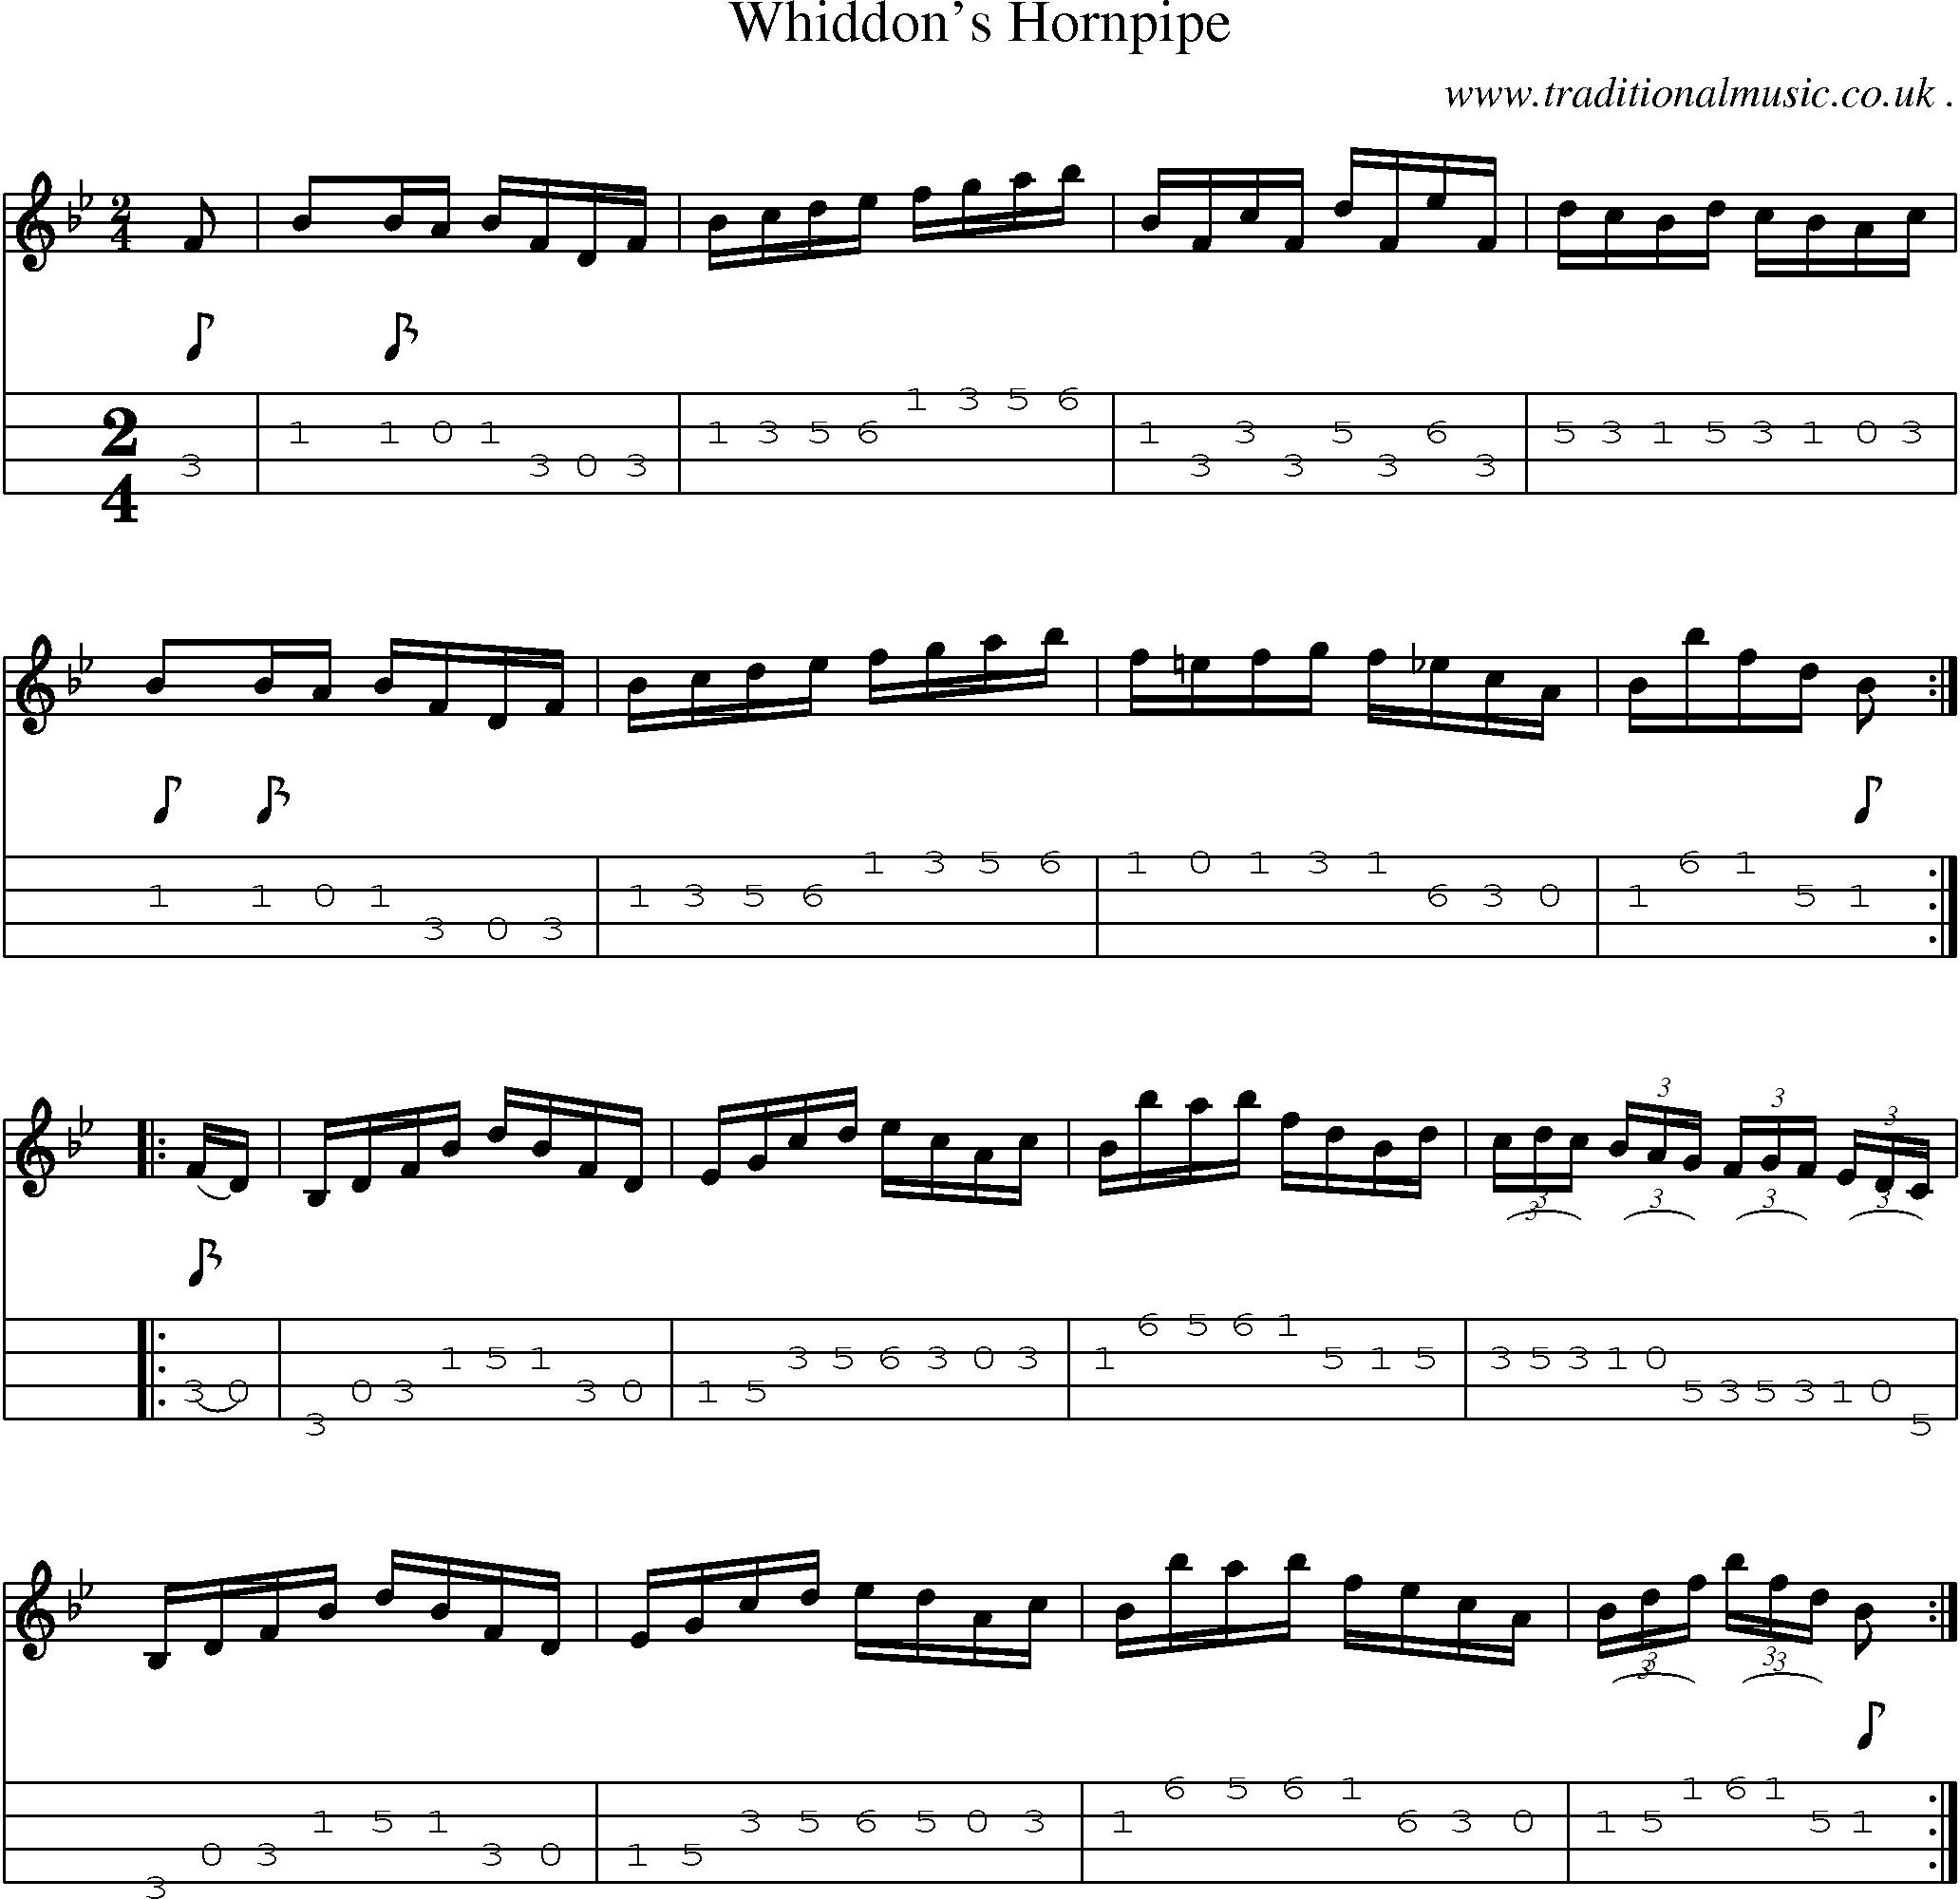 Sheet-Music and Mandolin Tabs for Whiddons Hornpipe